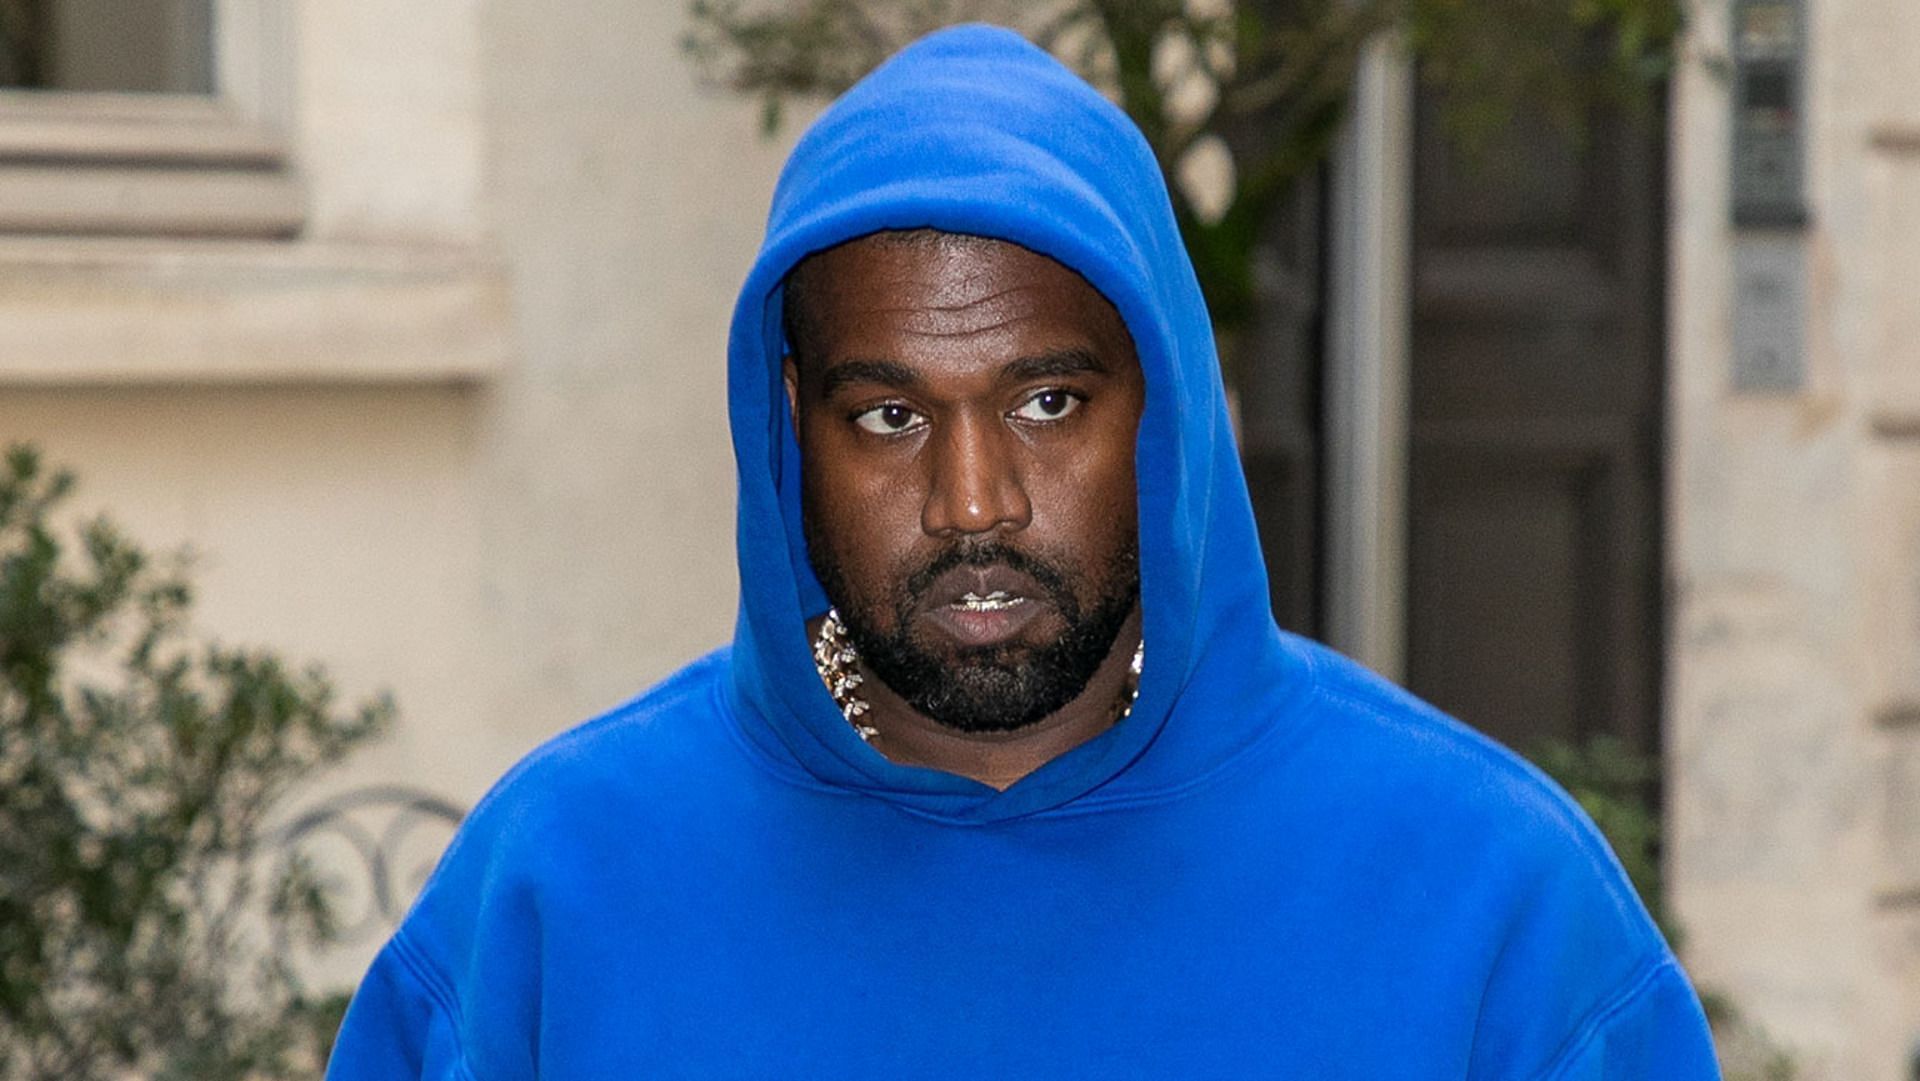 Kanye West claims to be autistic in interview (Image via Getty Images)